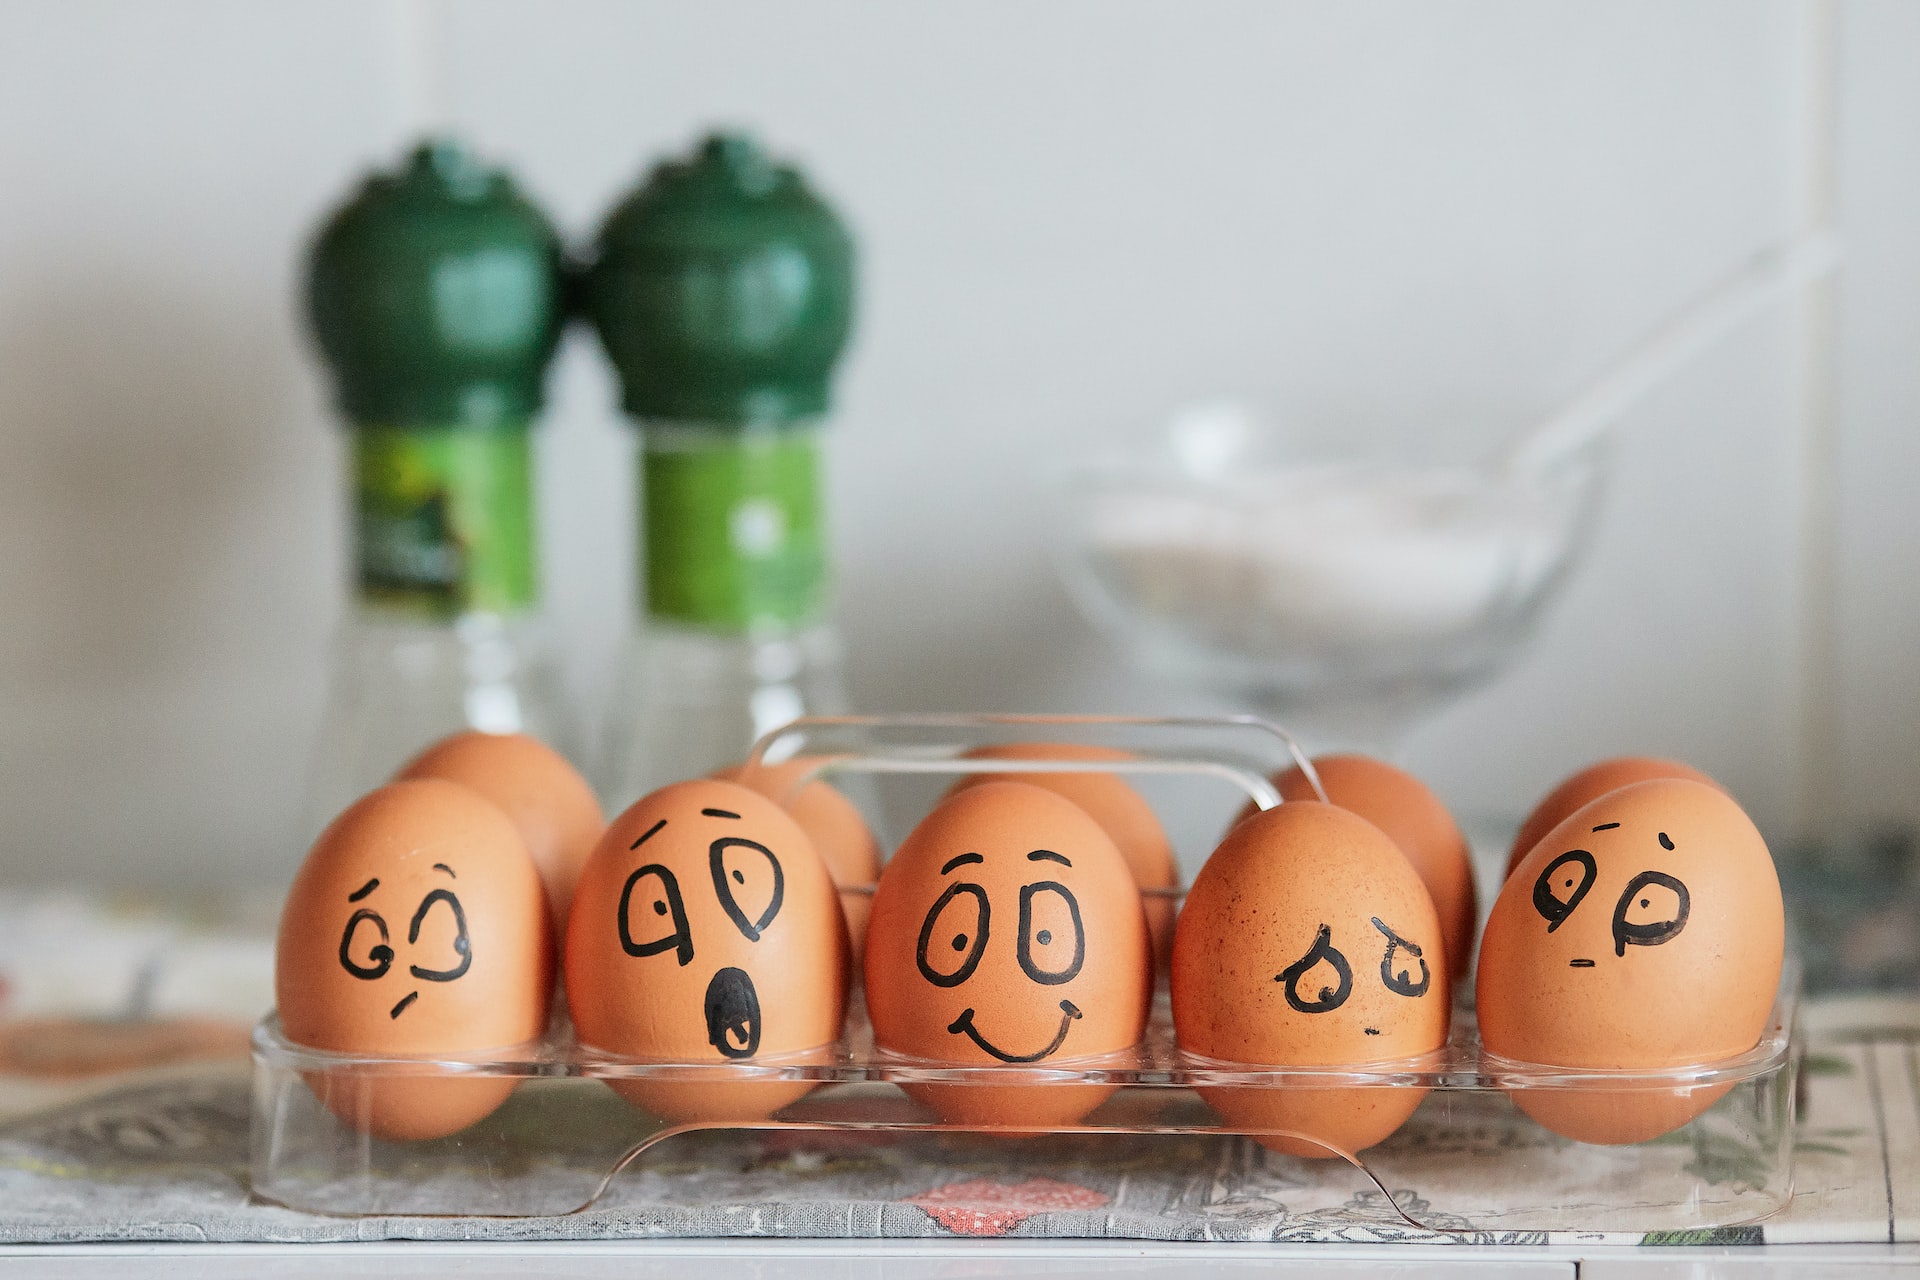 eggs in a box with different faces drawn on them